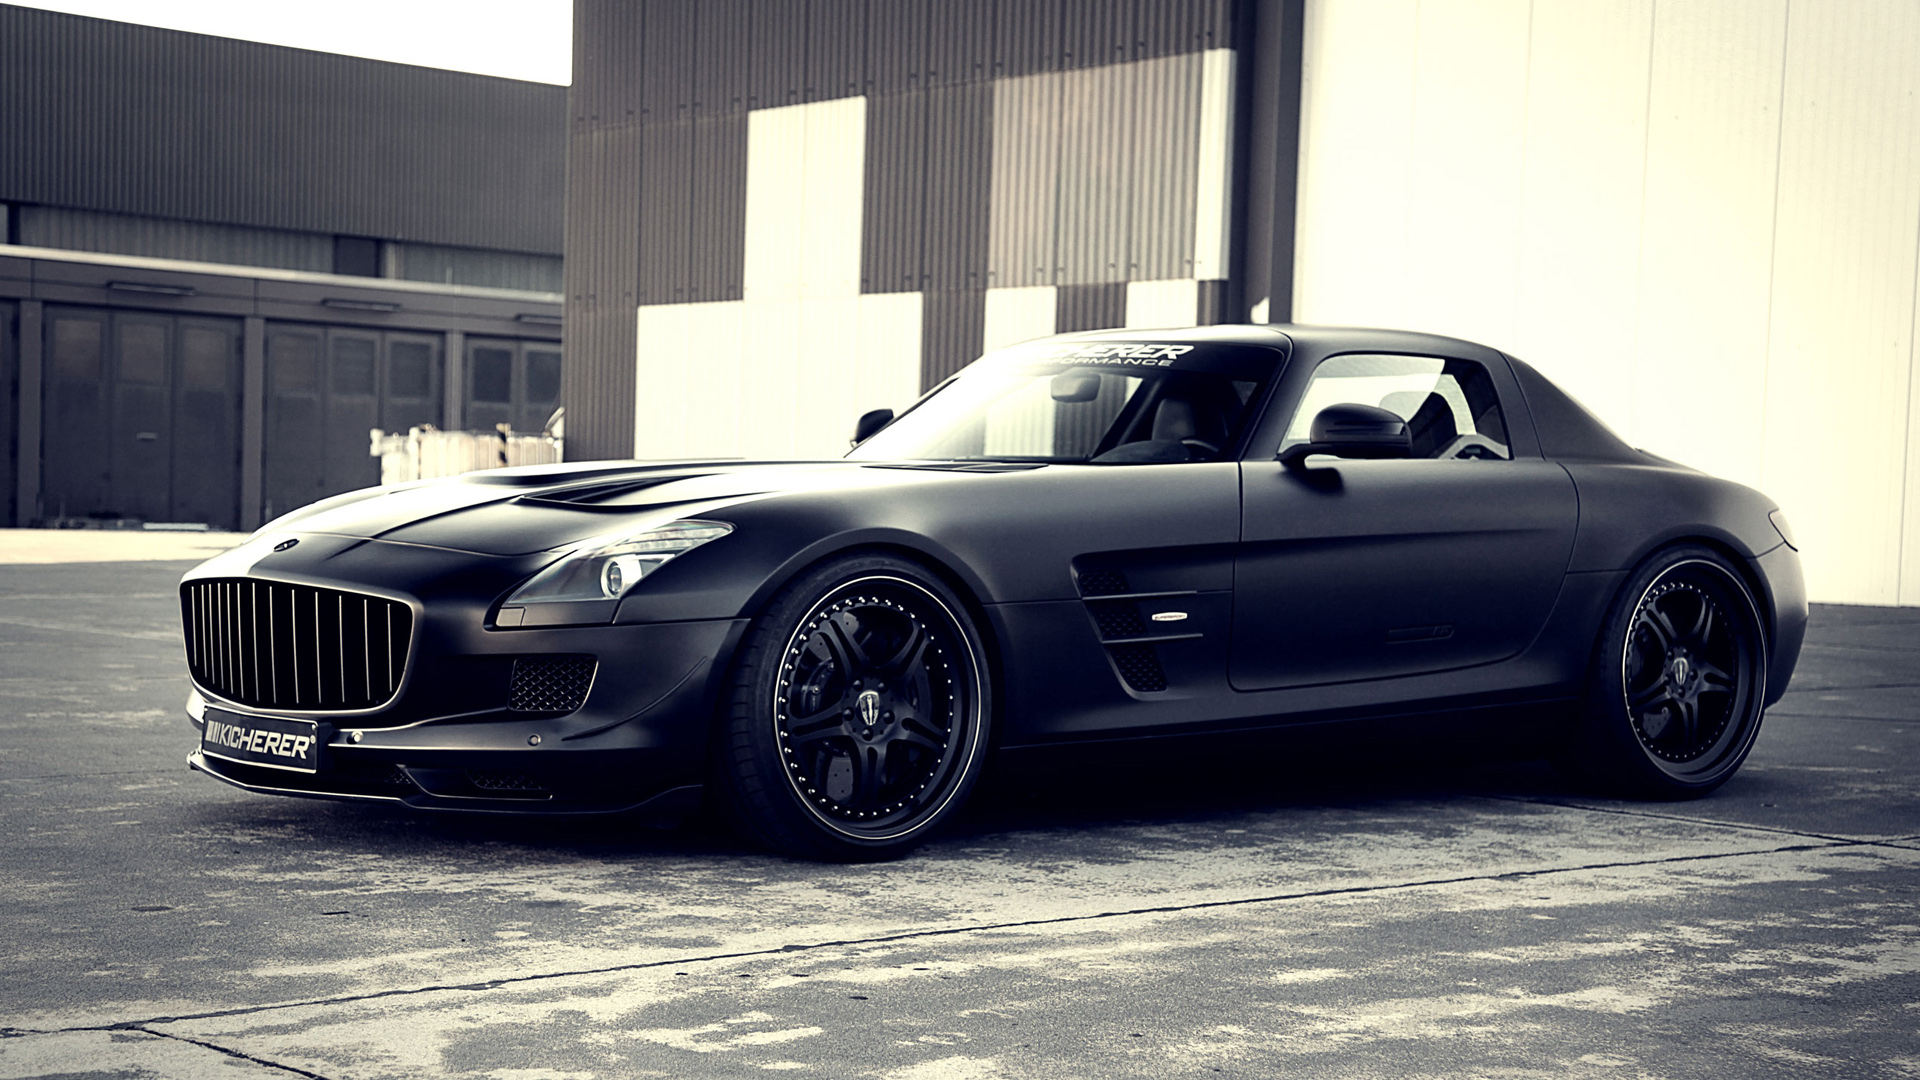 Awesome Mercedes Benz Sls Amg Wallpaper Sport Cars Wallpapers 2016